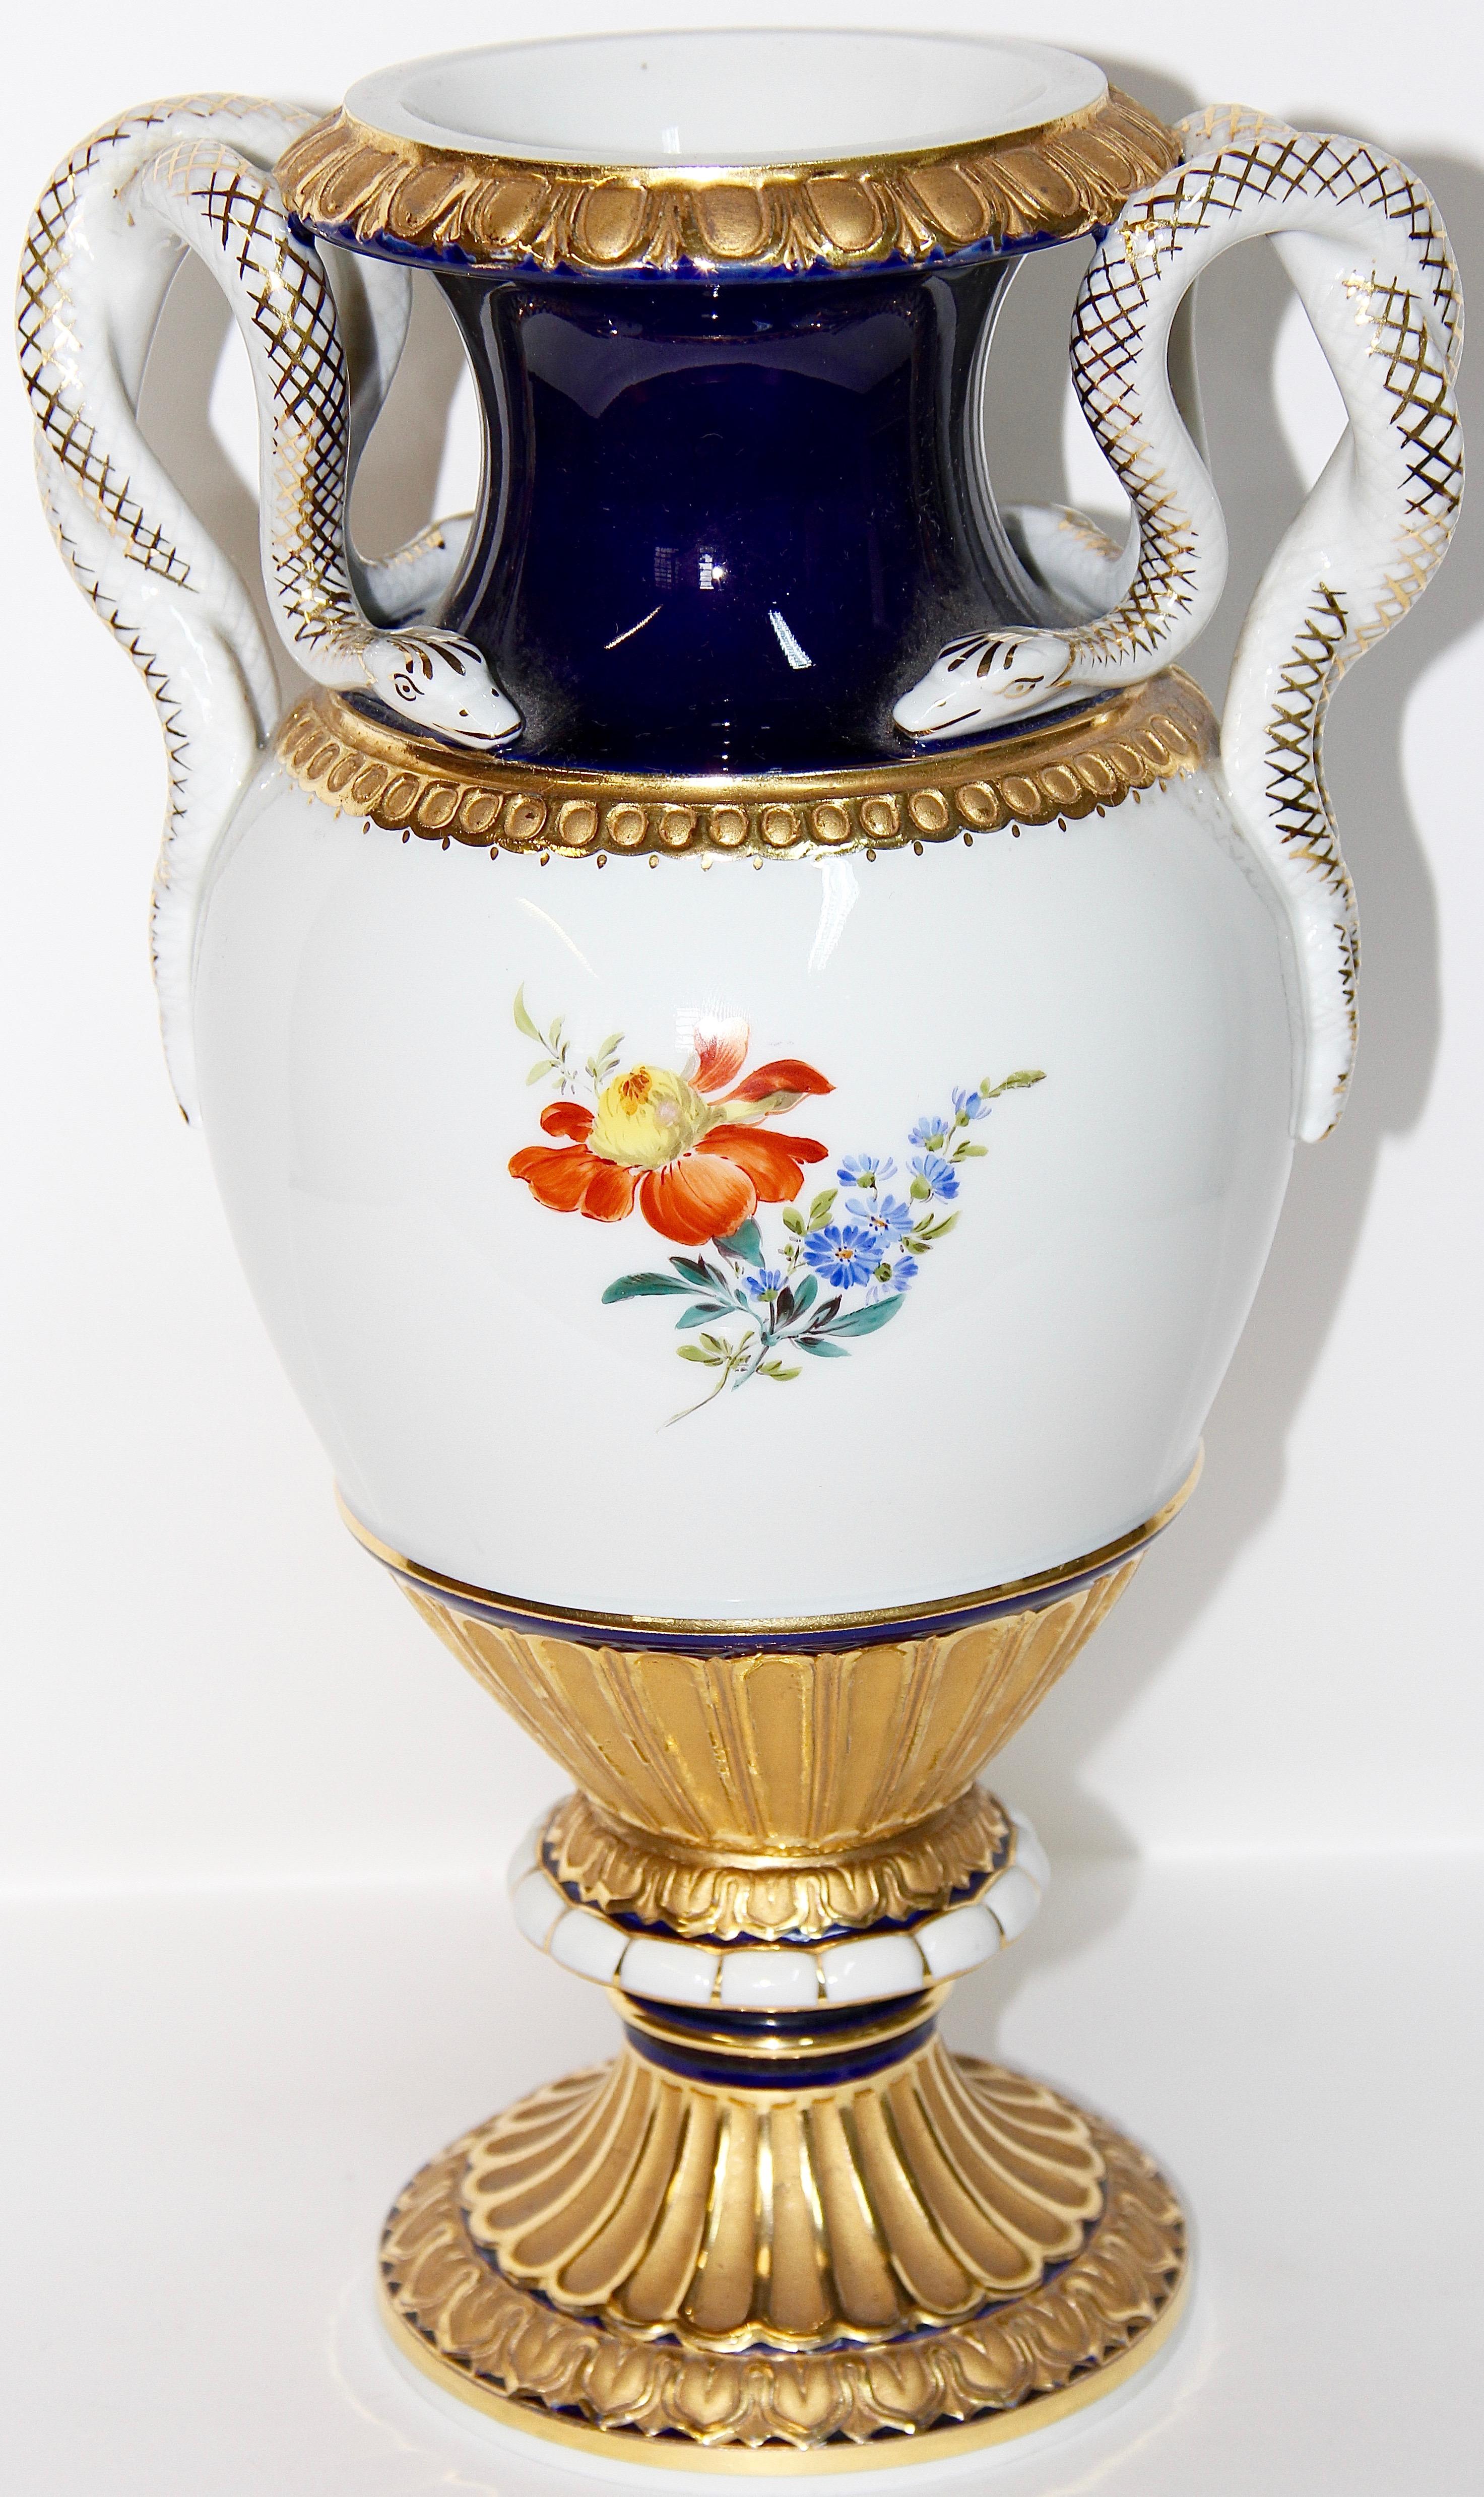 Meissen porcelain snakes handle vase. 1st quality.
Cobalt and gold painting.

Small chip on the socket.